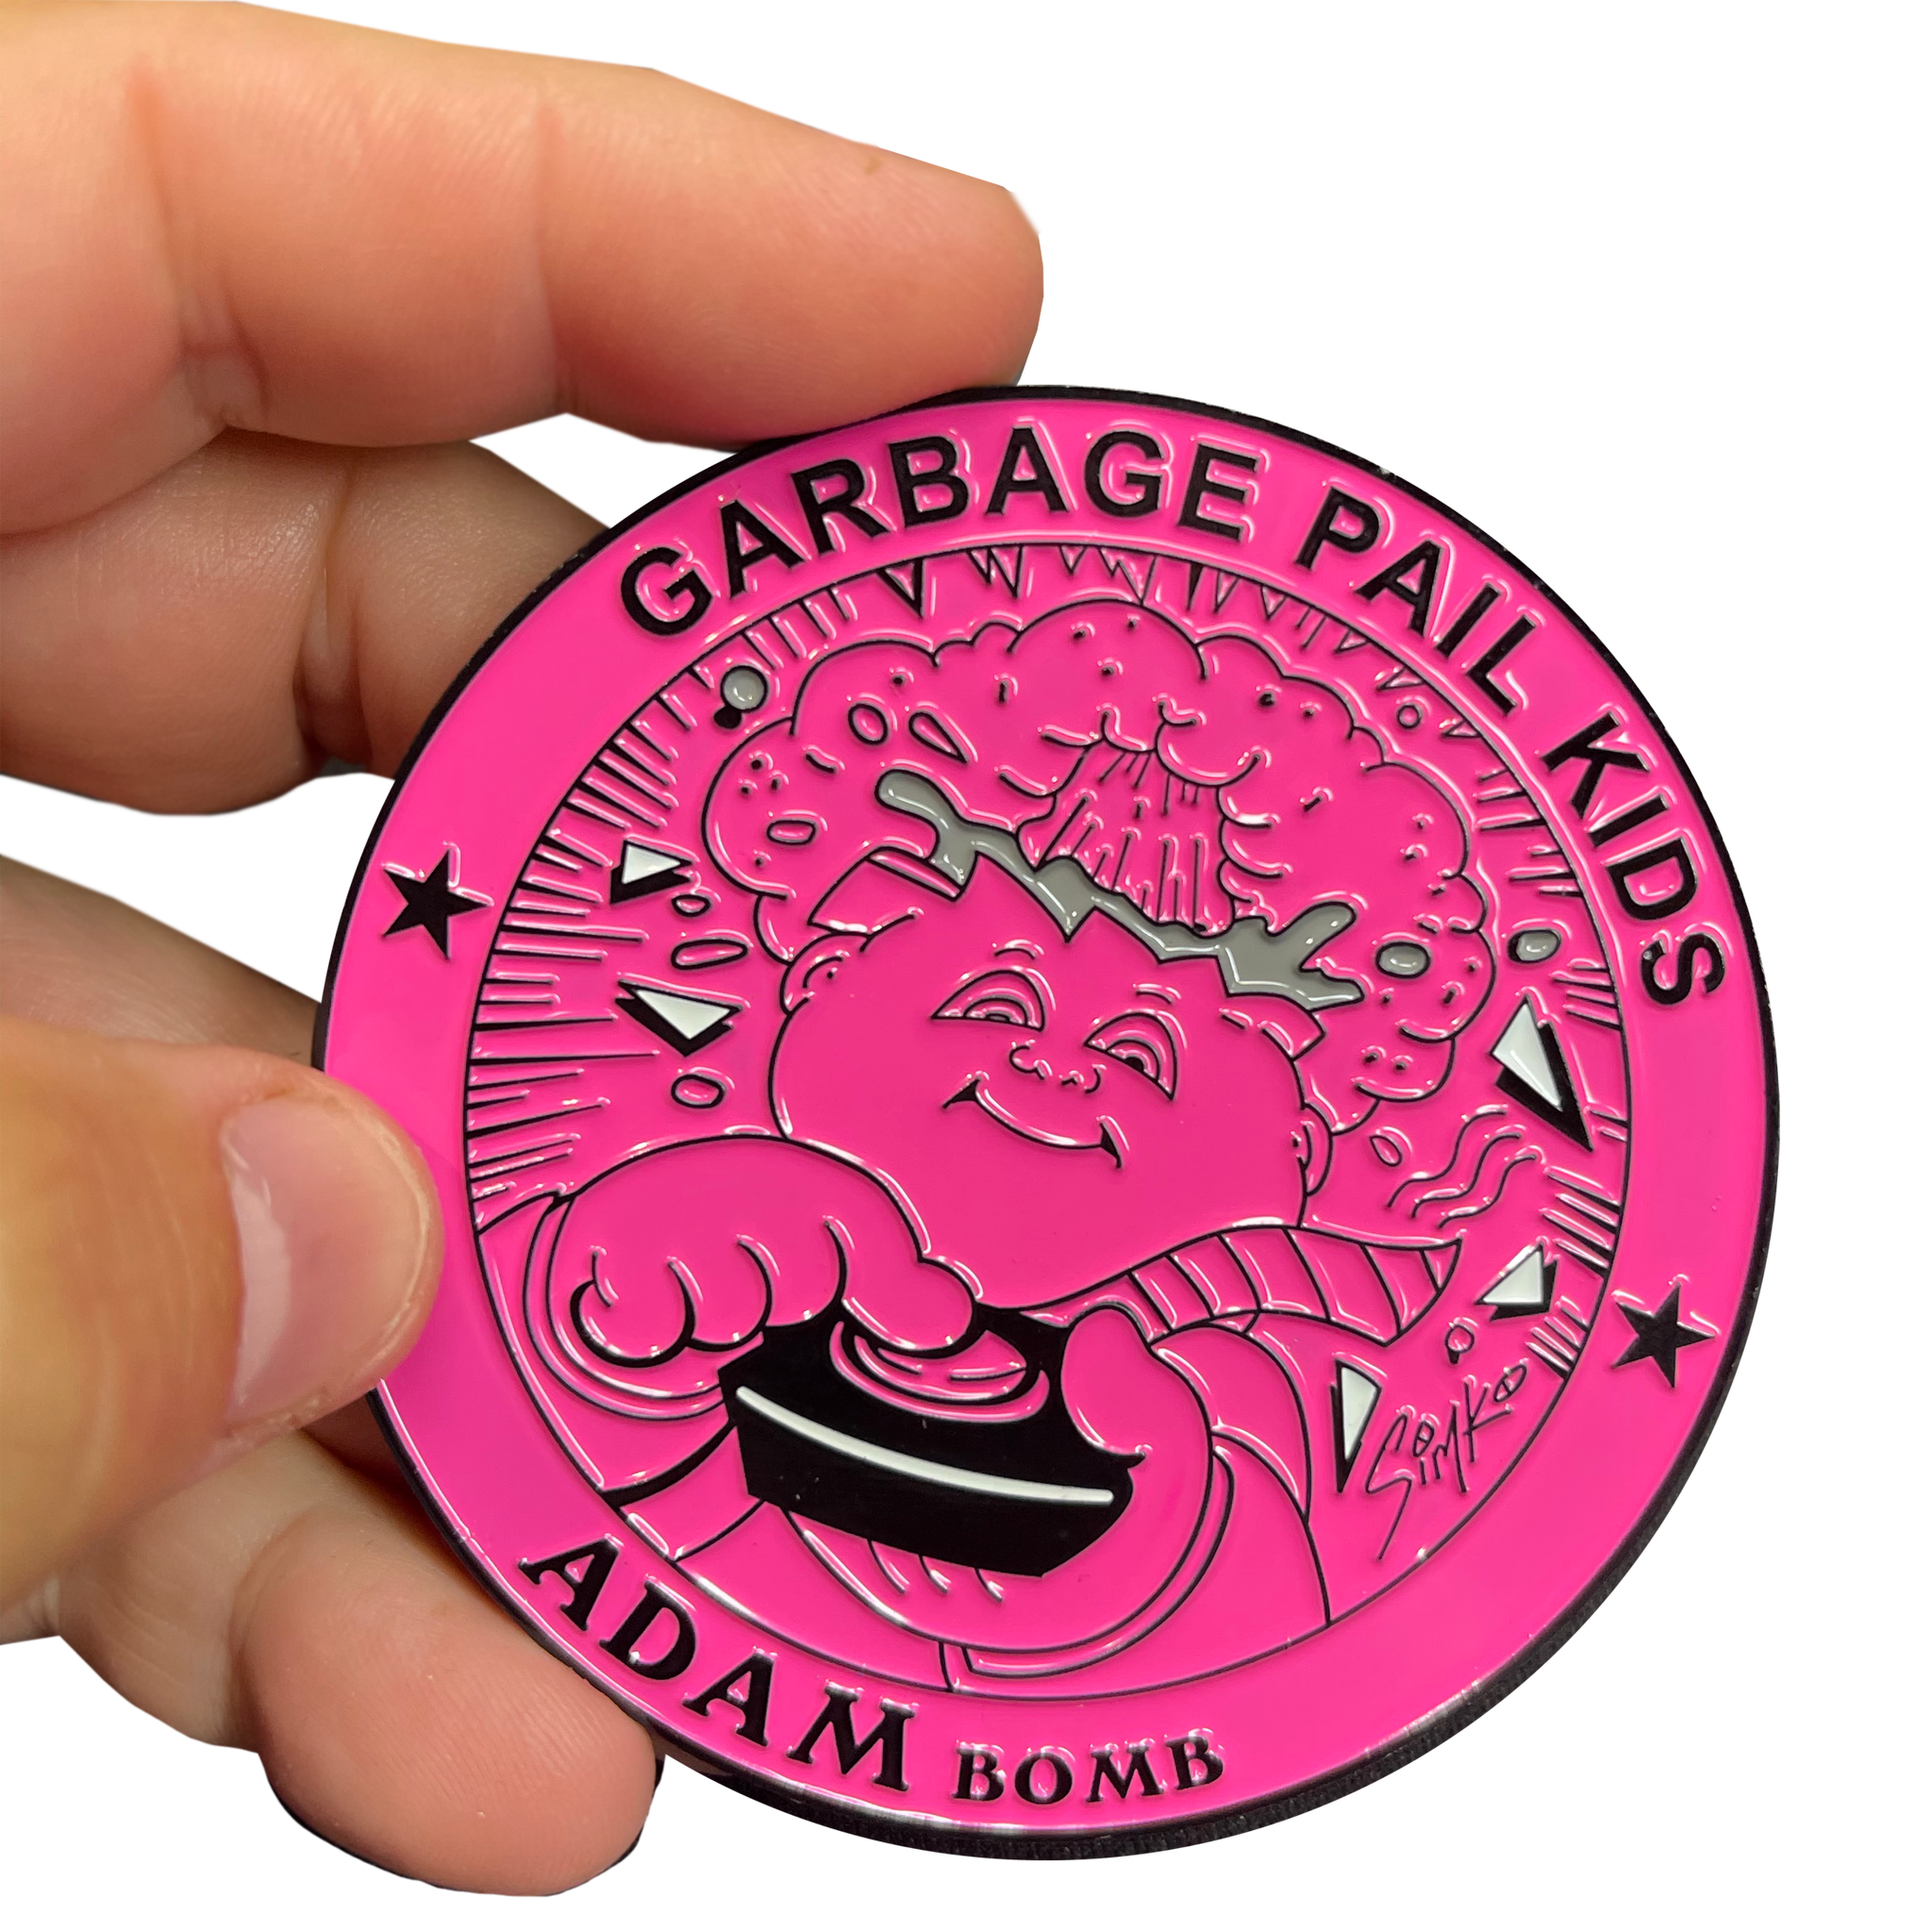 GPK-DD-007 PINK Variation 3 inch SIMKO Topps Officially Licensed Adam Bomb GPK Challenge Coin Garbage Pail Kids